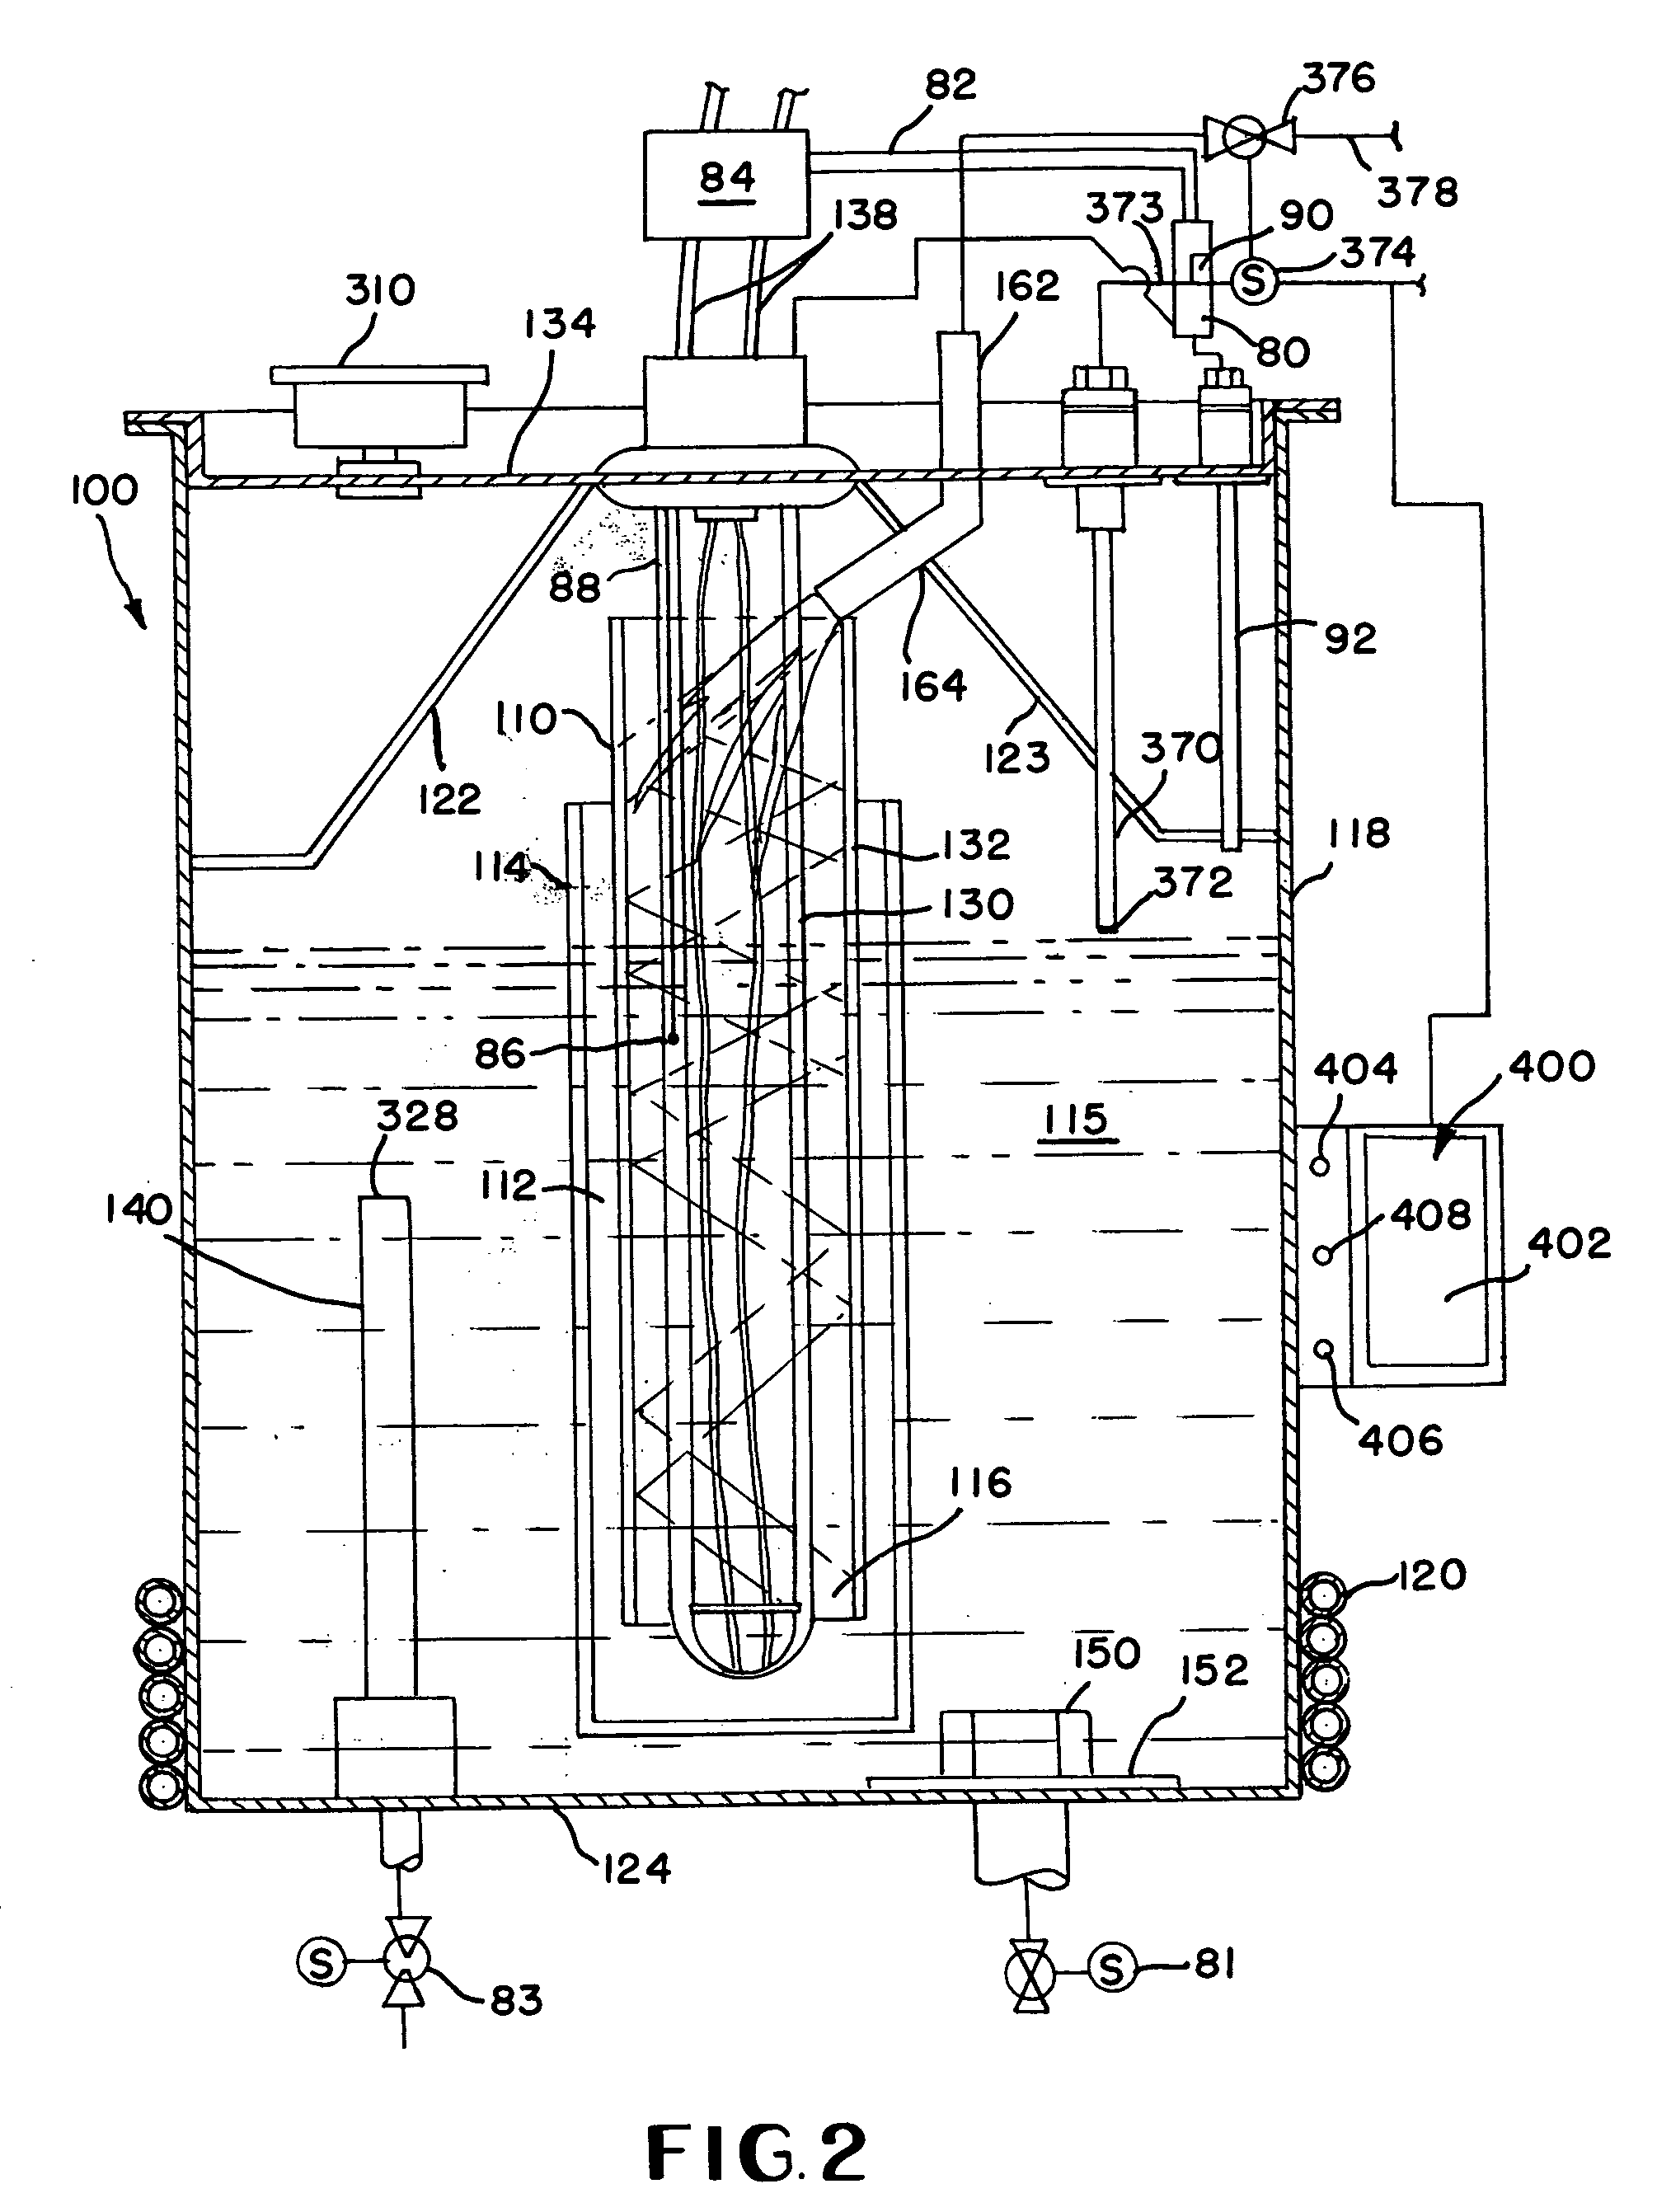 Treated water dispensing system